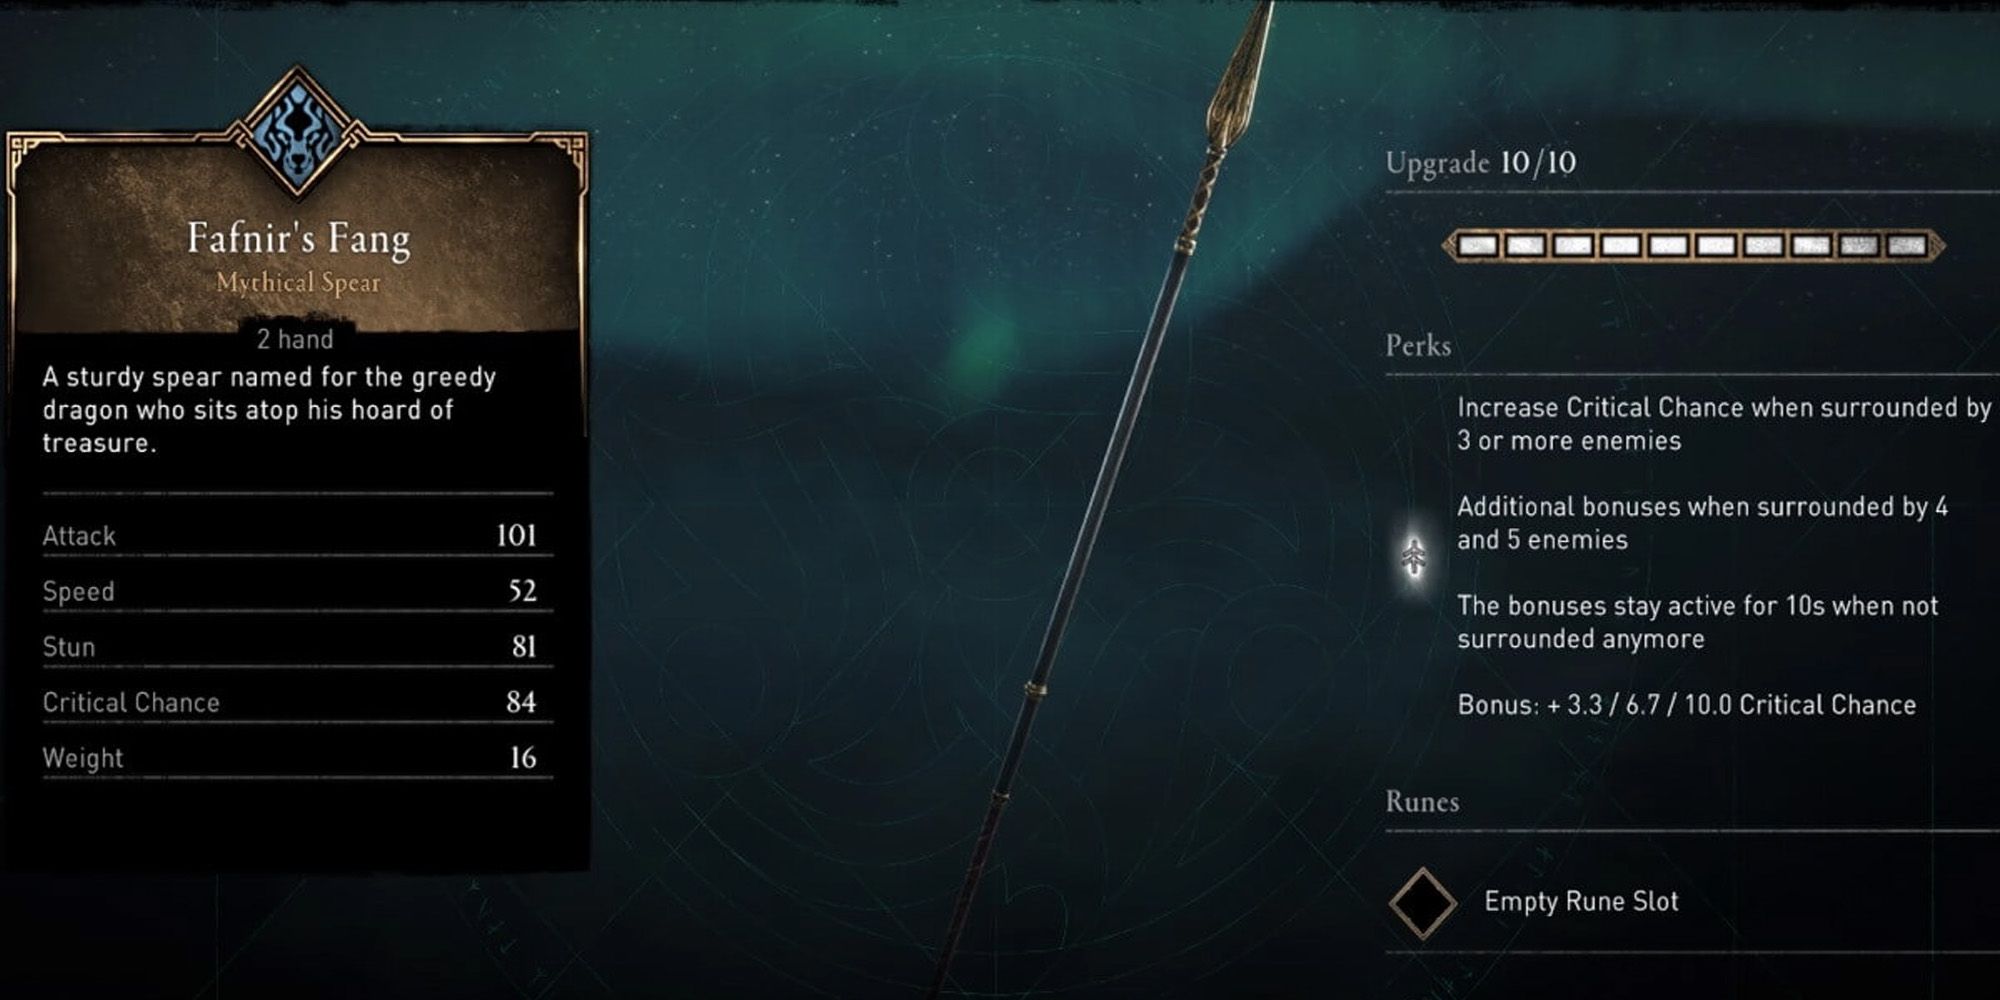 Image of Fafnir's Fang spear and its stats in Assassin's Creed Valhalla